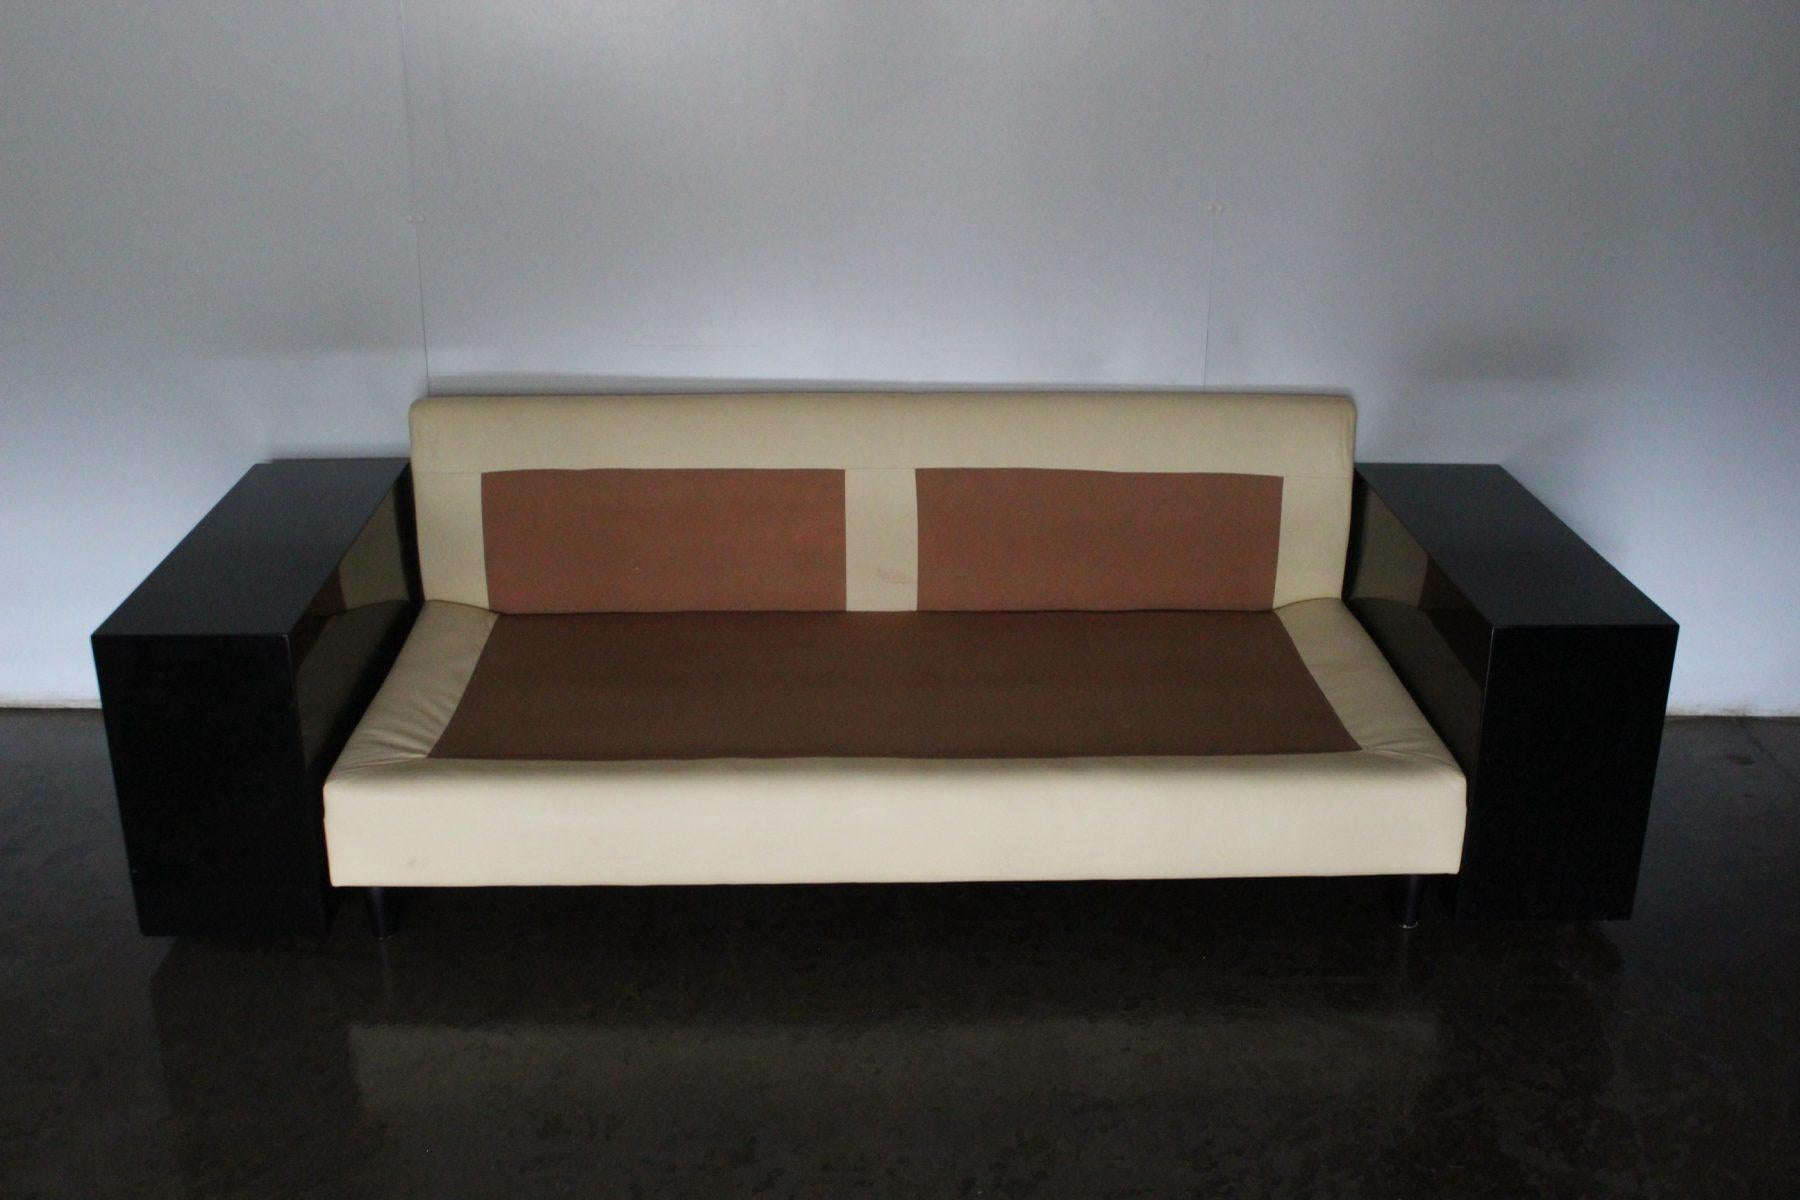 Pair of Aram “Eileen Gray Lota” Sofas in Cream Leather For Sale 4